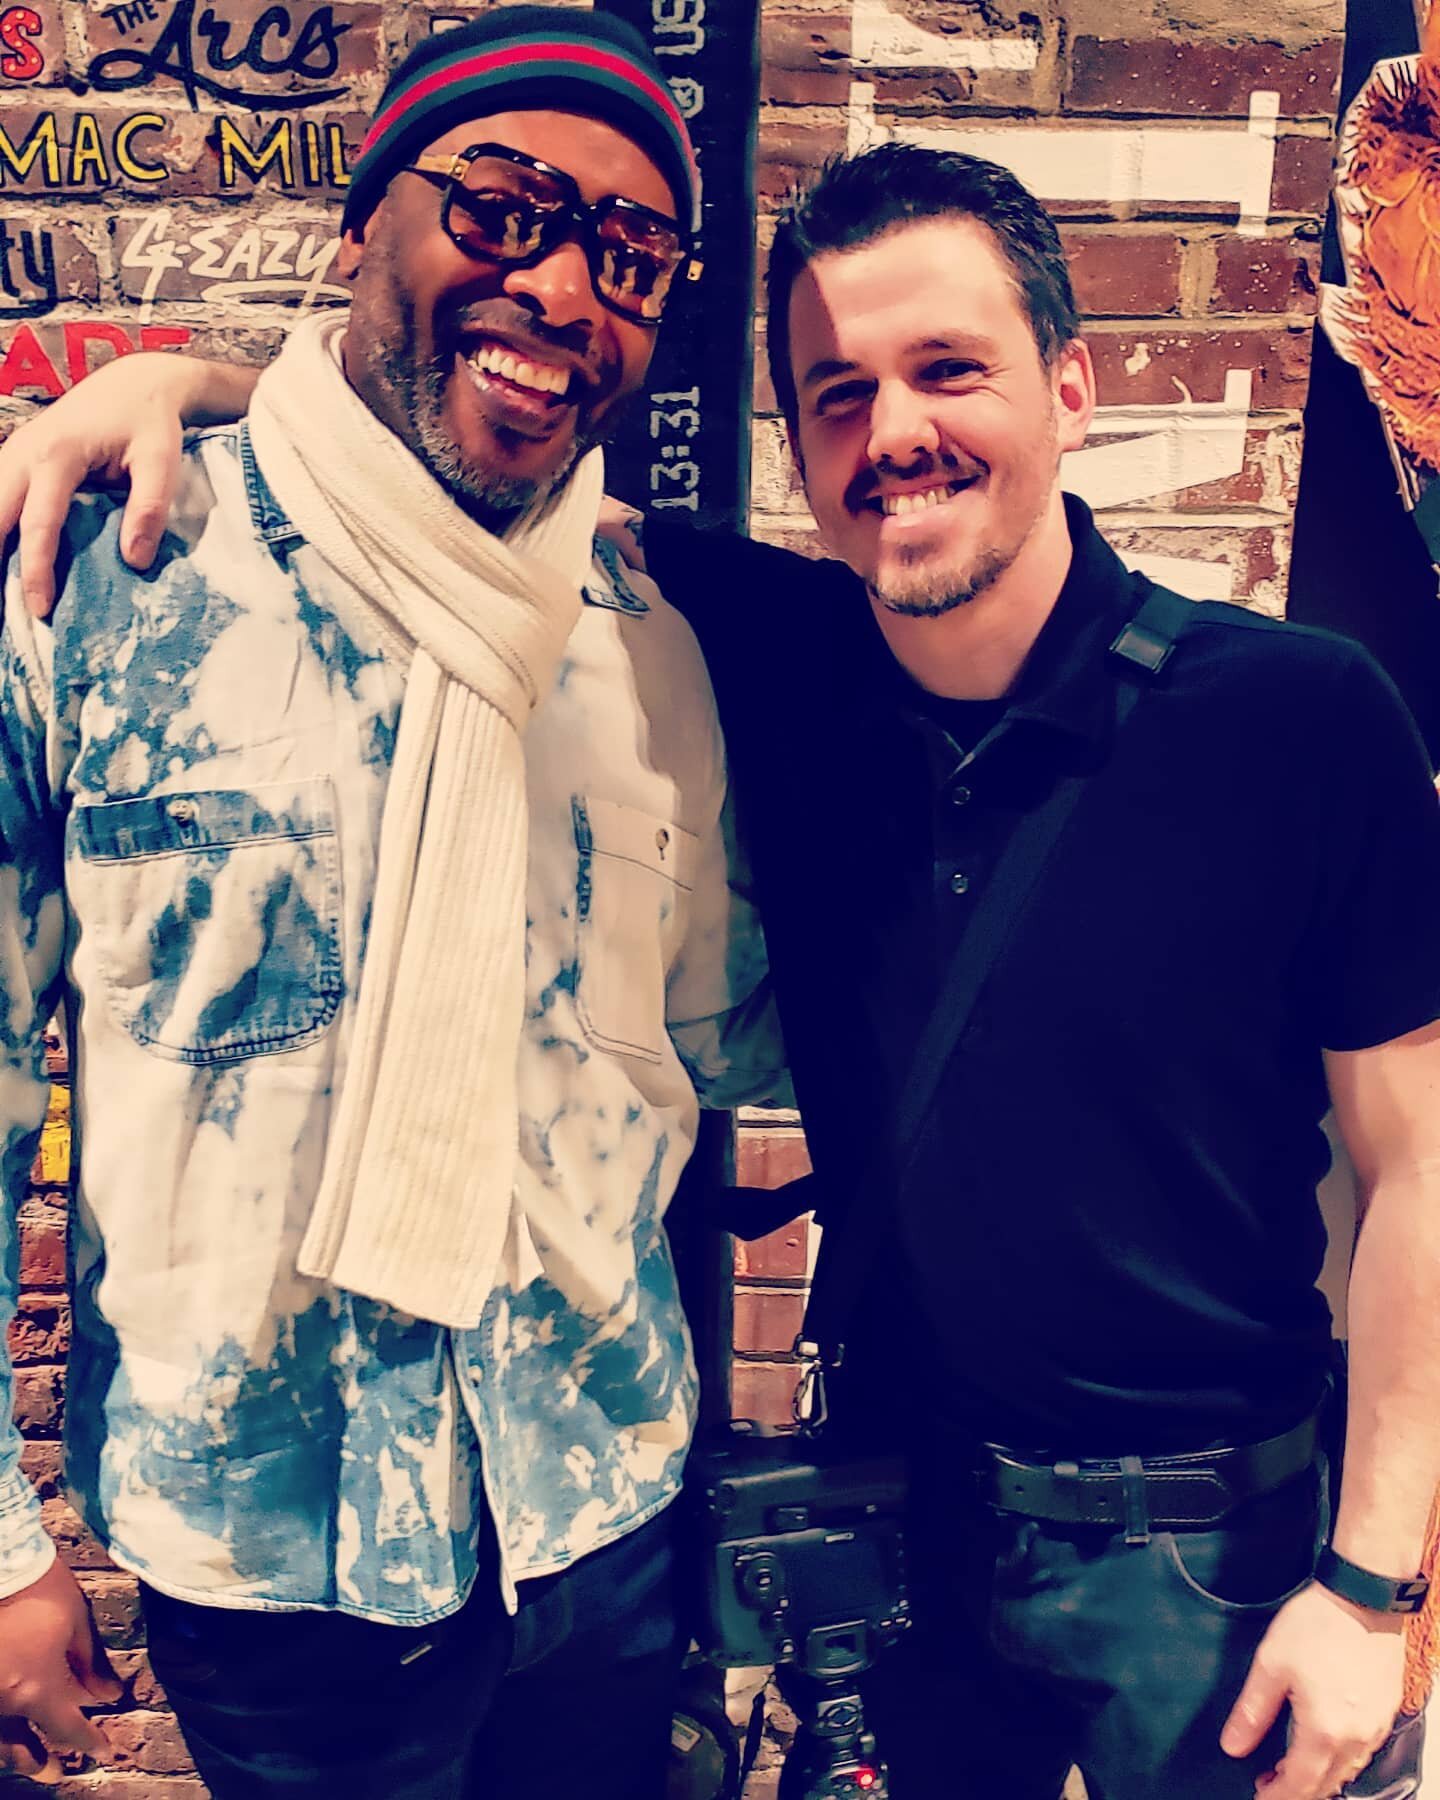 Great night &amp; Awesome Shoot! at Cheers for Chop 2020 got to meet DJ Jazzy Jeff
#cheersforchop2020 #cheersforchop #djjazzyjeff #deyoephoto #fillmorephilly